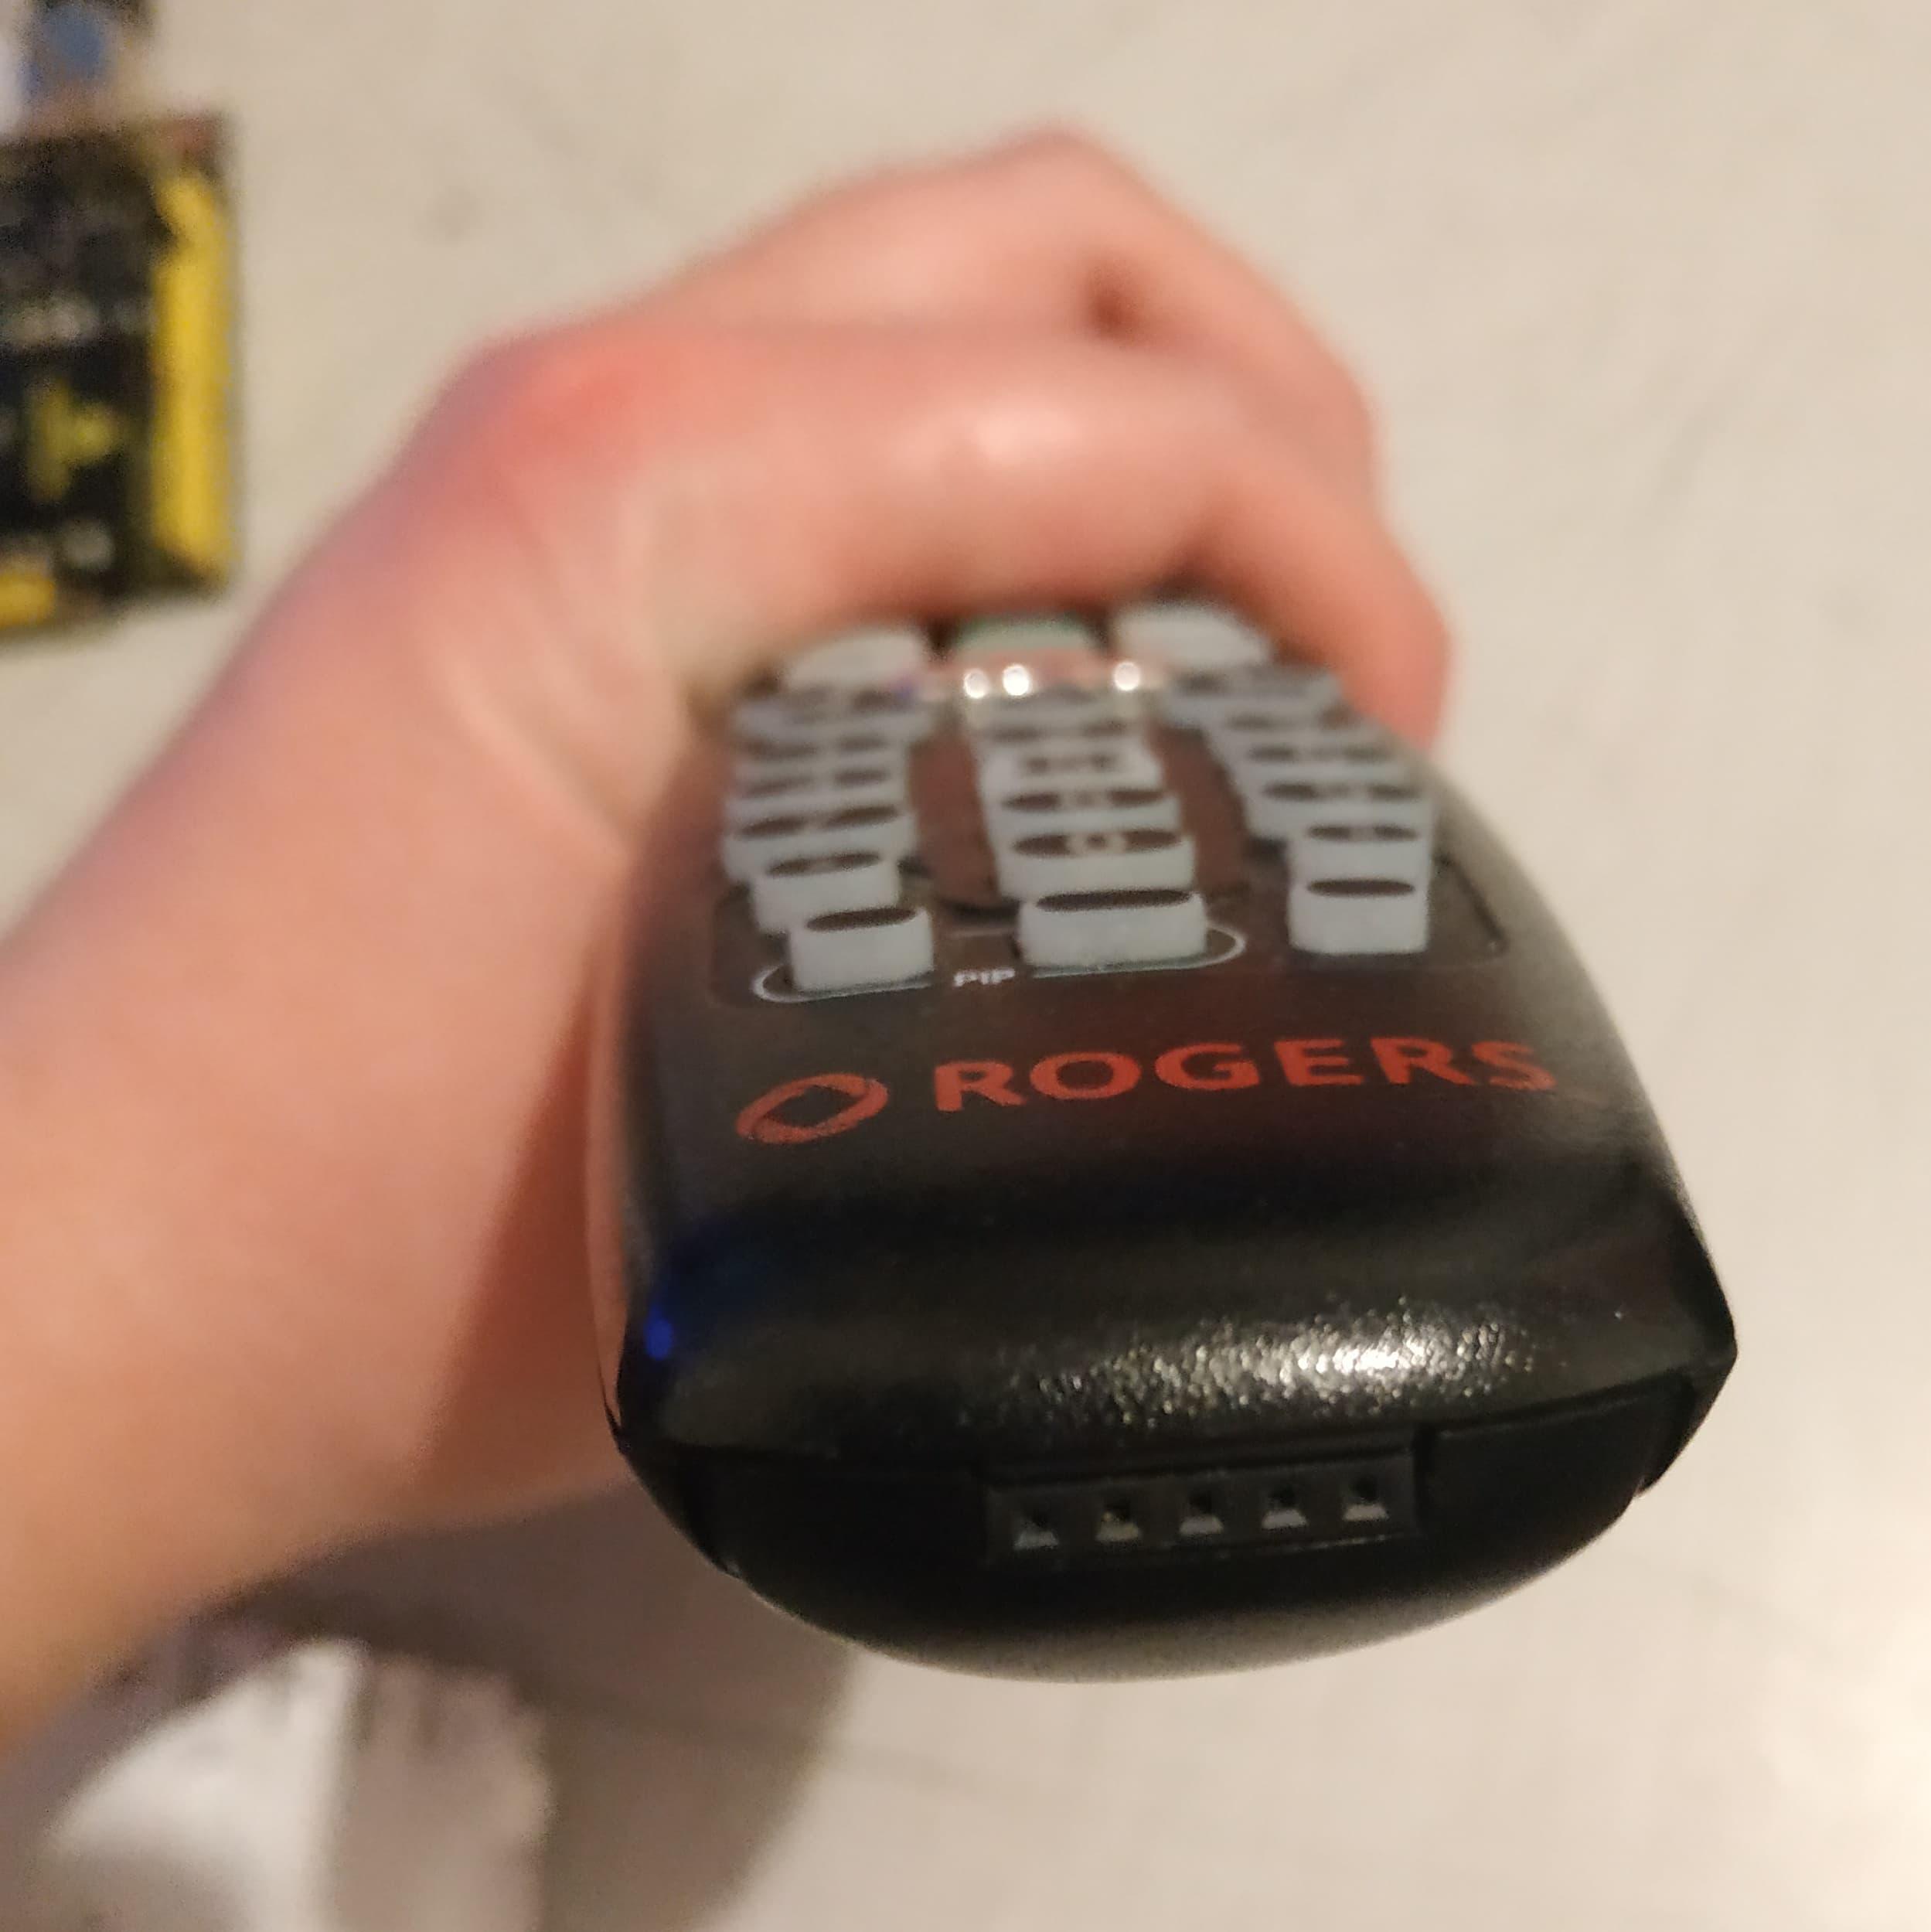 My hand holding a TV remote over a desk, with the bottom part towards the camera. The Rogers logo appears below the number pad. And below that, on the very bottom of the remote, is a black rectangular programming port